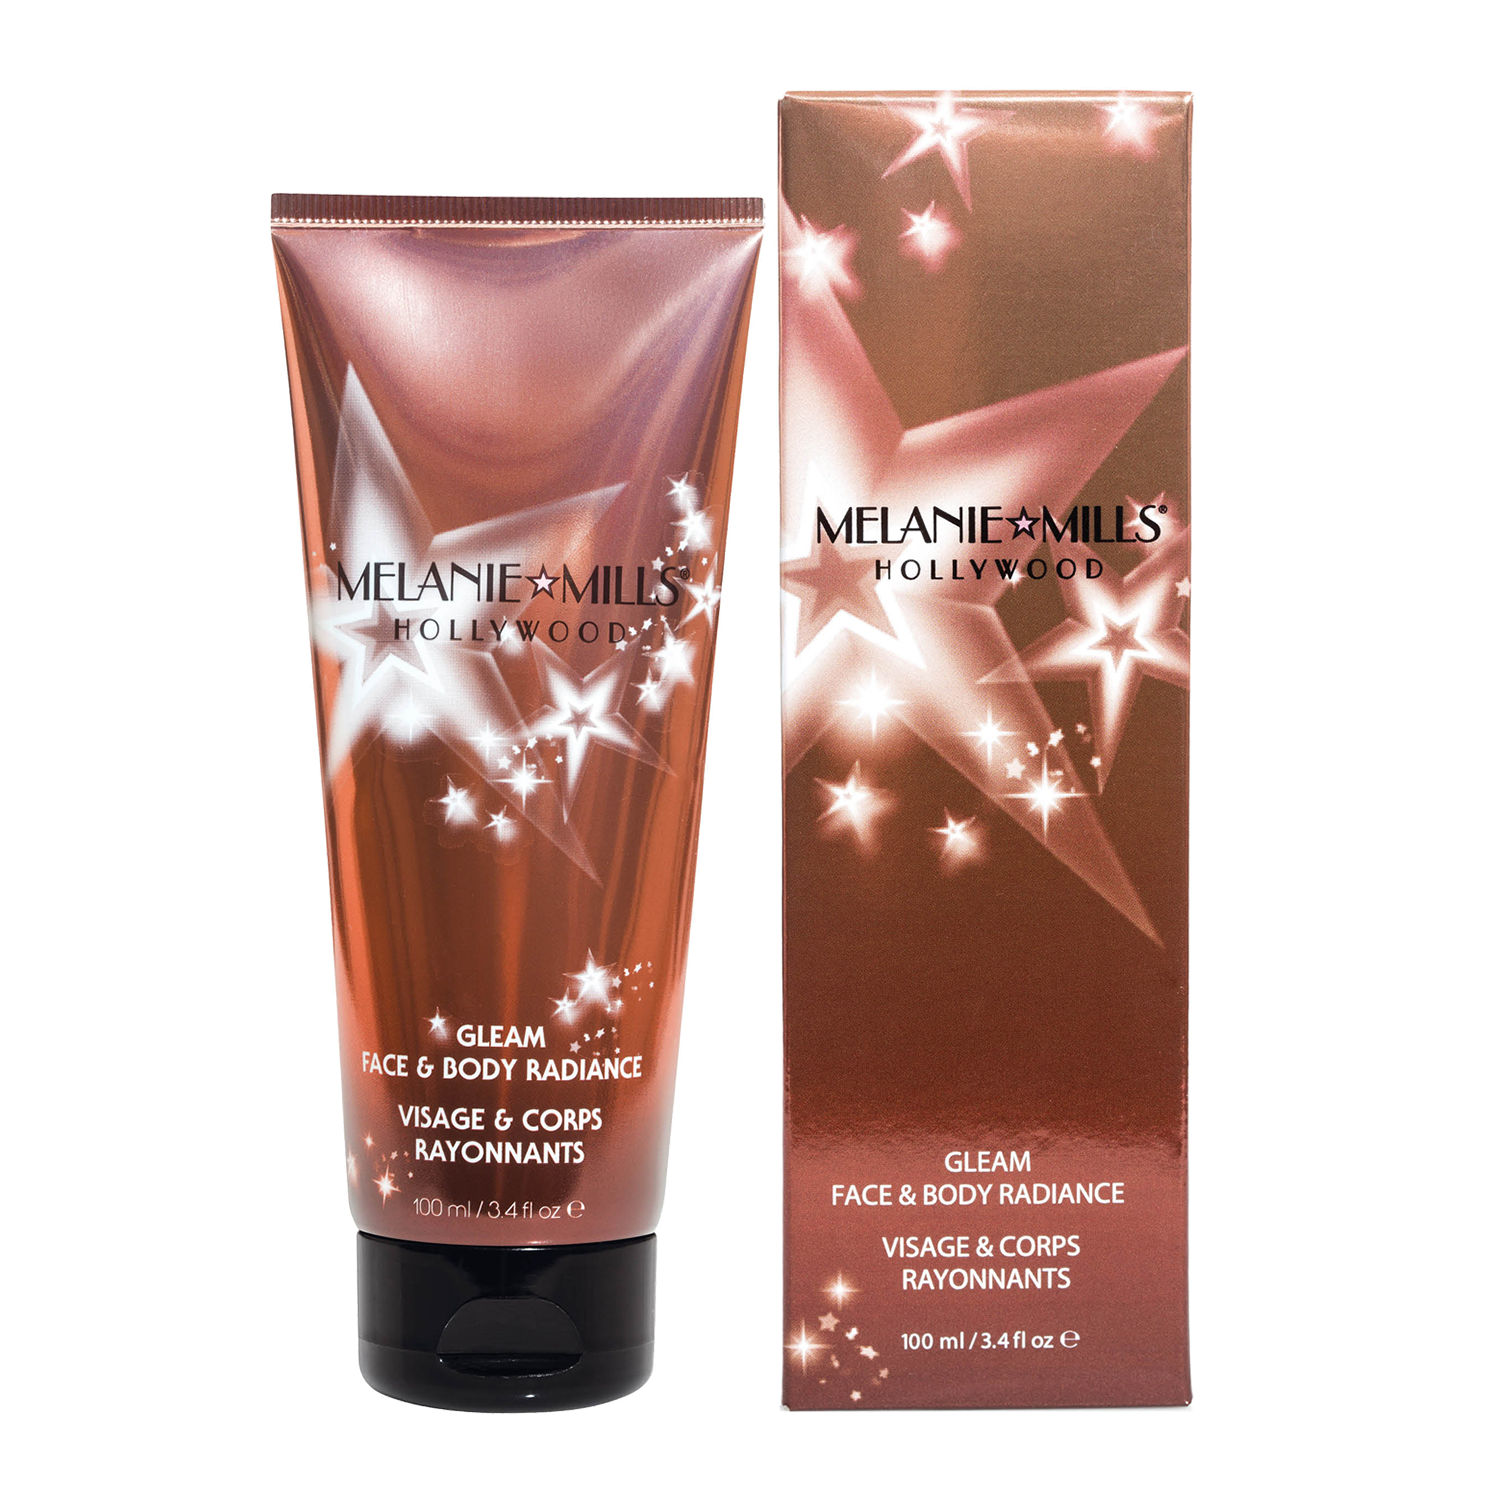 Melanie Mills Hollywood Peach Deluxe Gleam Face & Body Radiance